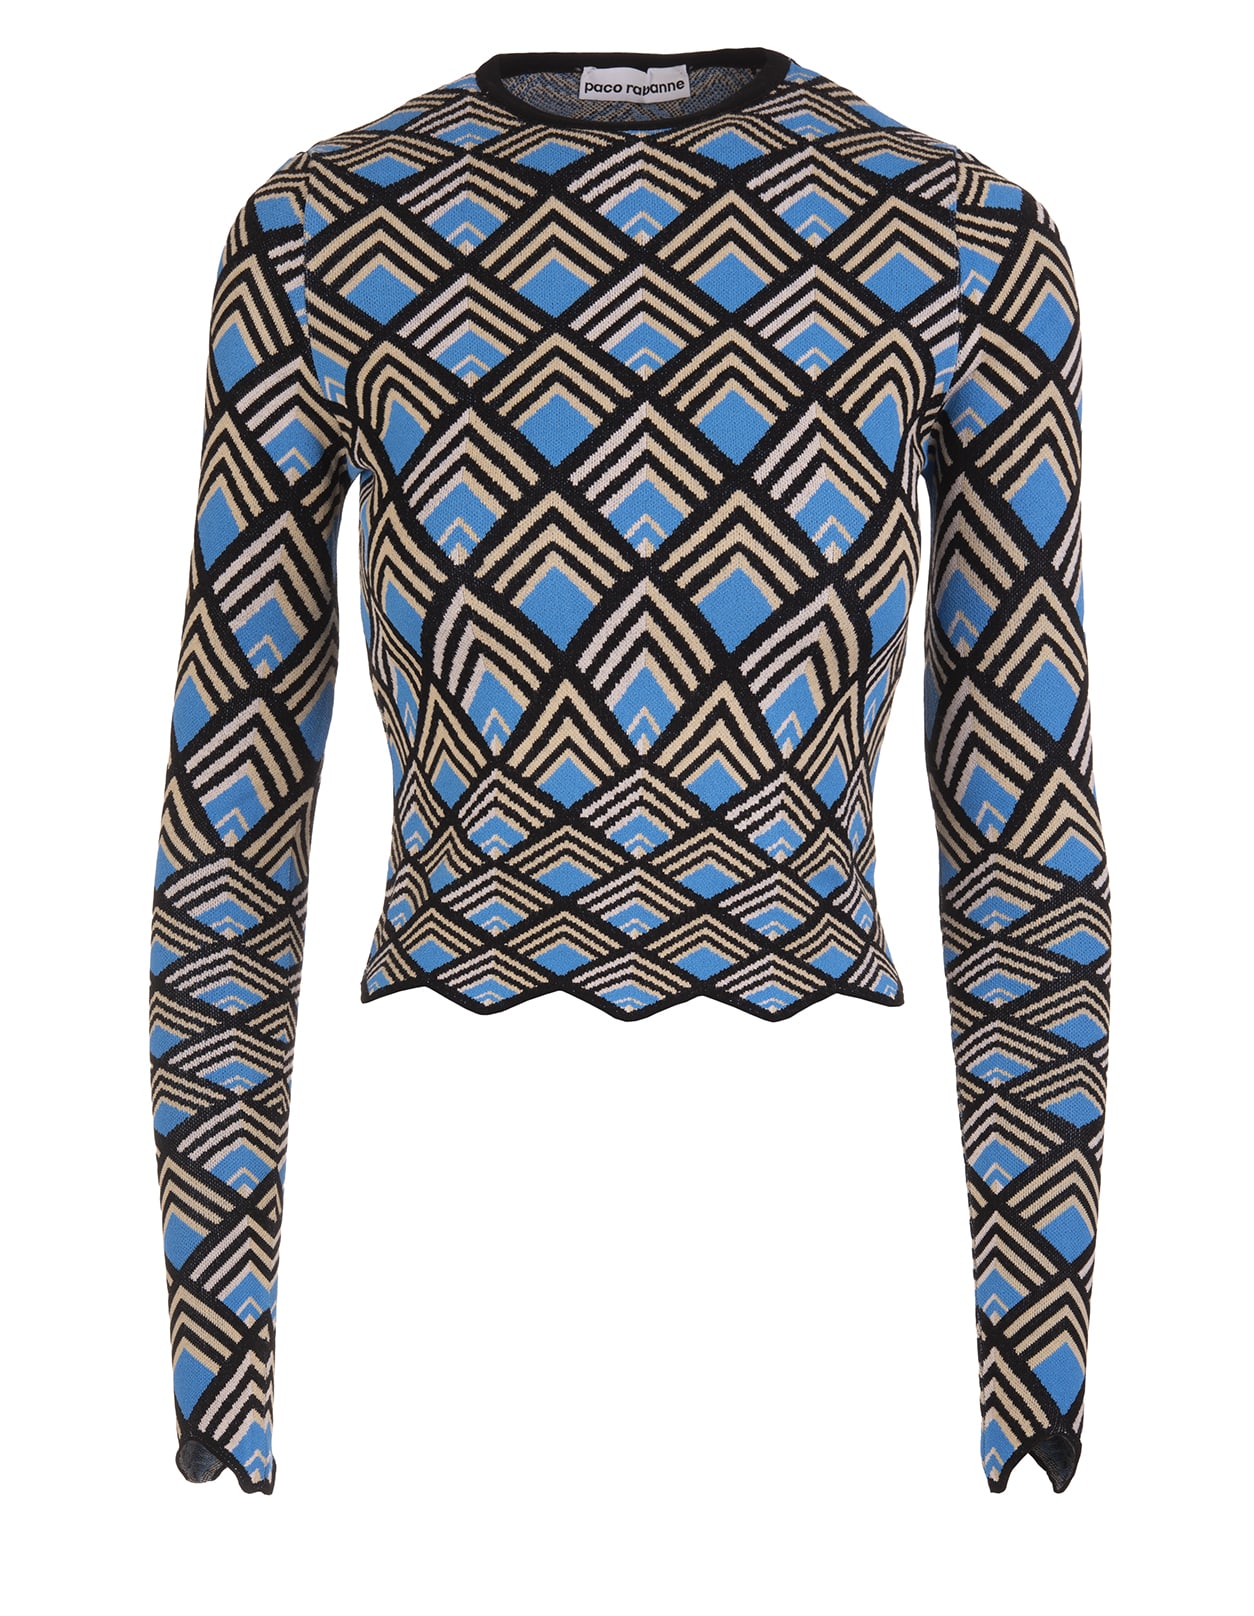 Paco Rabanne Black Long Sleeve Top With Blue, Gold And Silver Geometric Pattern